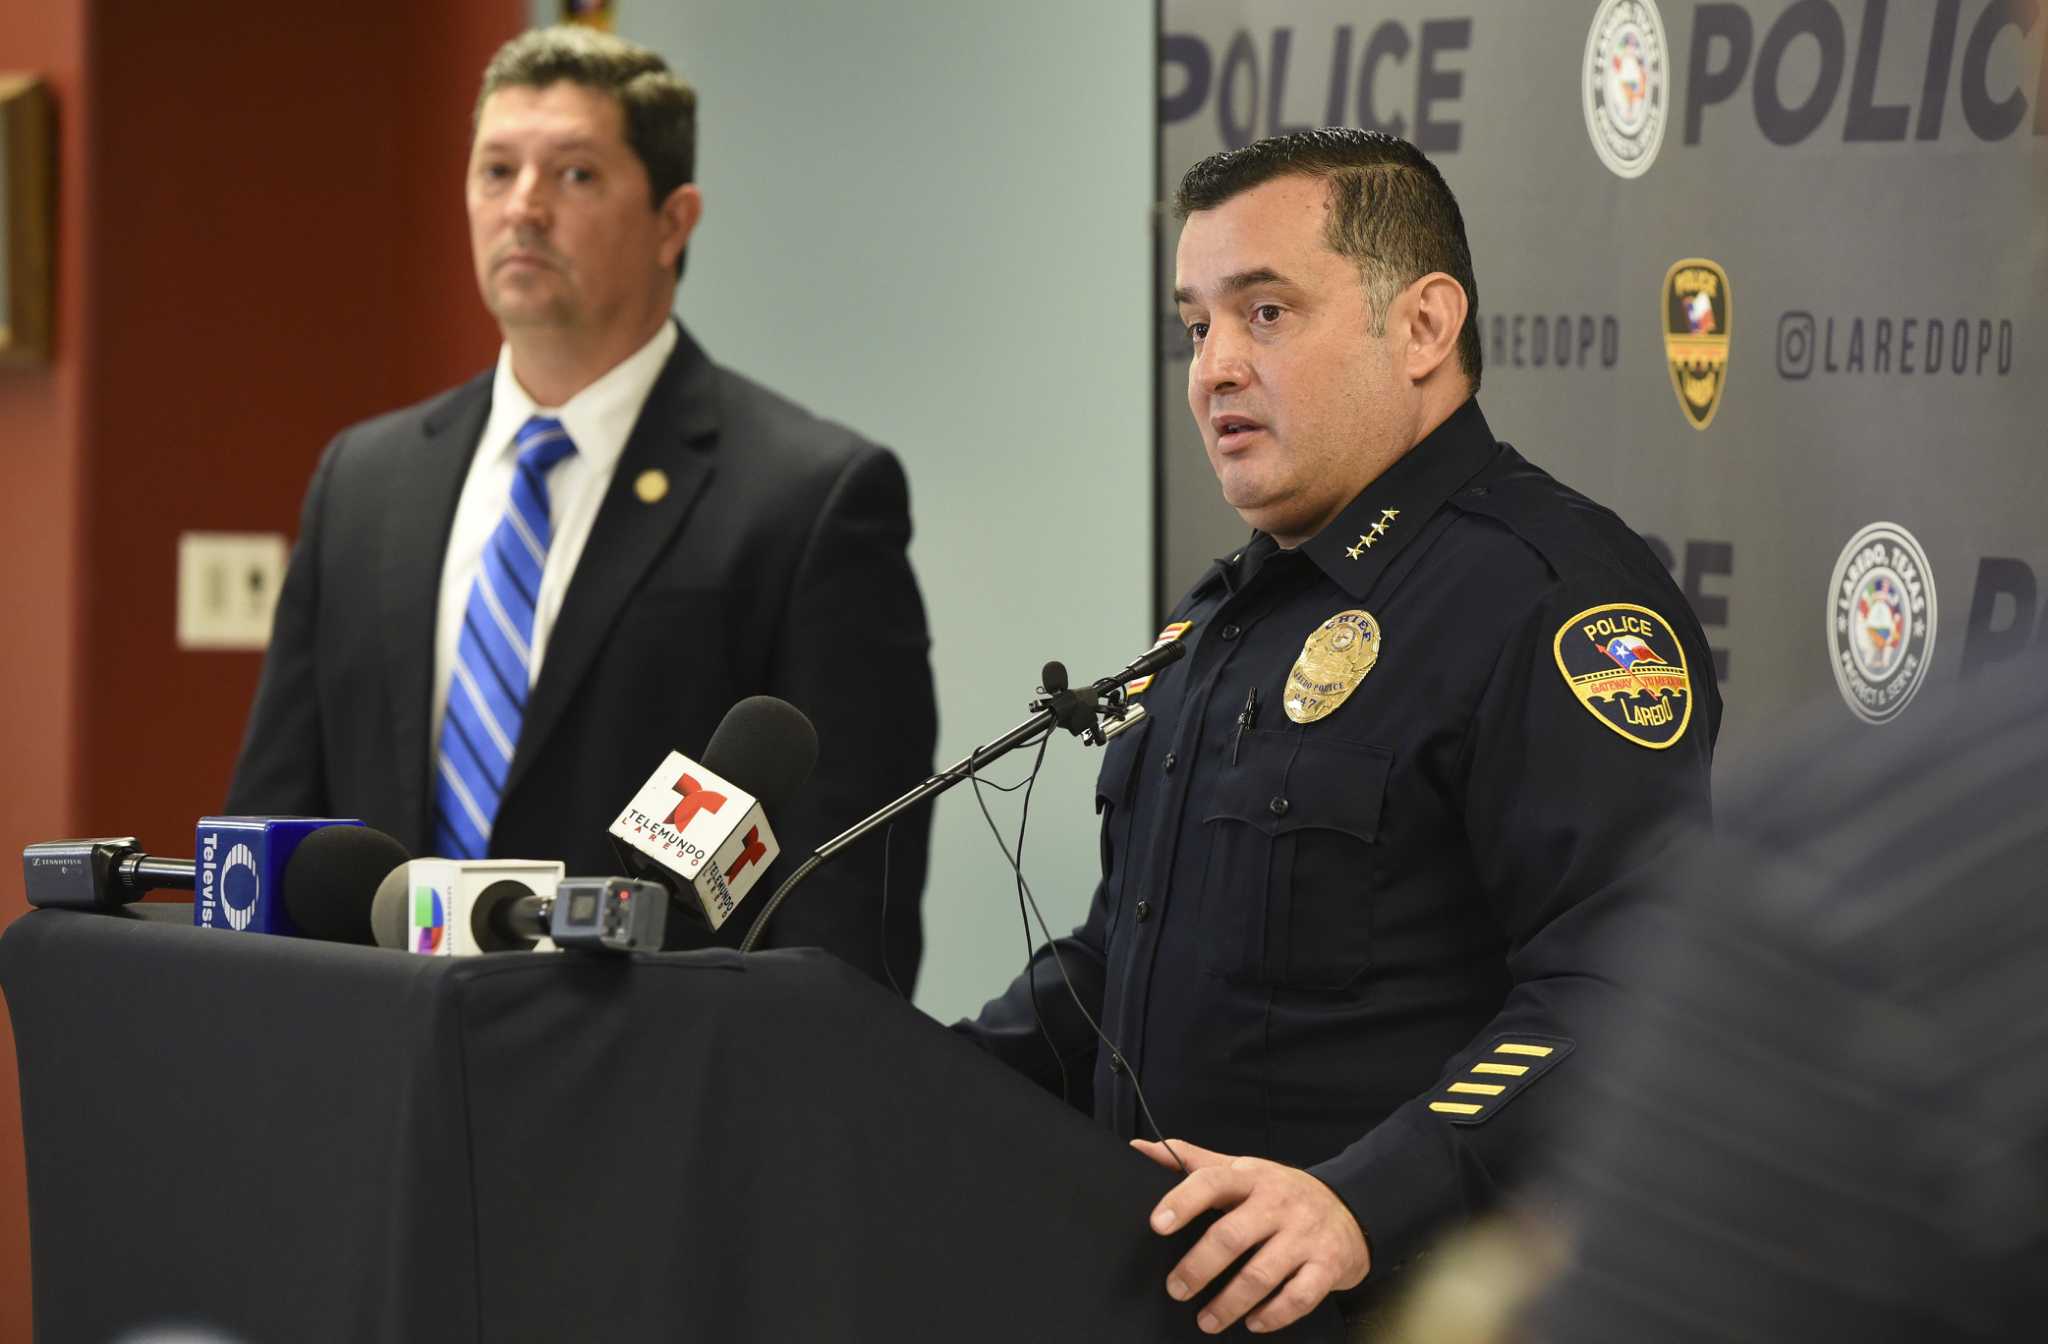 Laredo police: Relationship with the community is essential